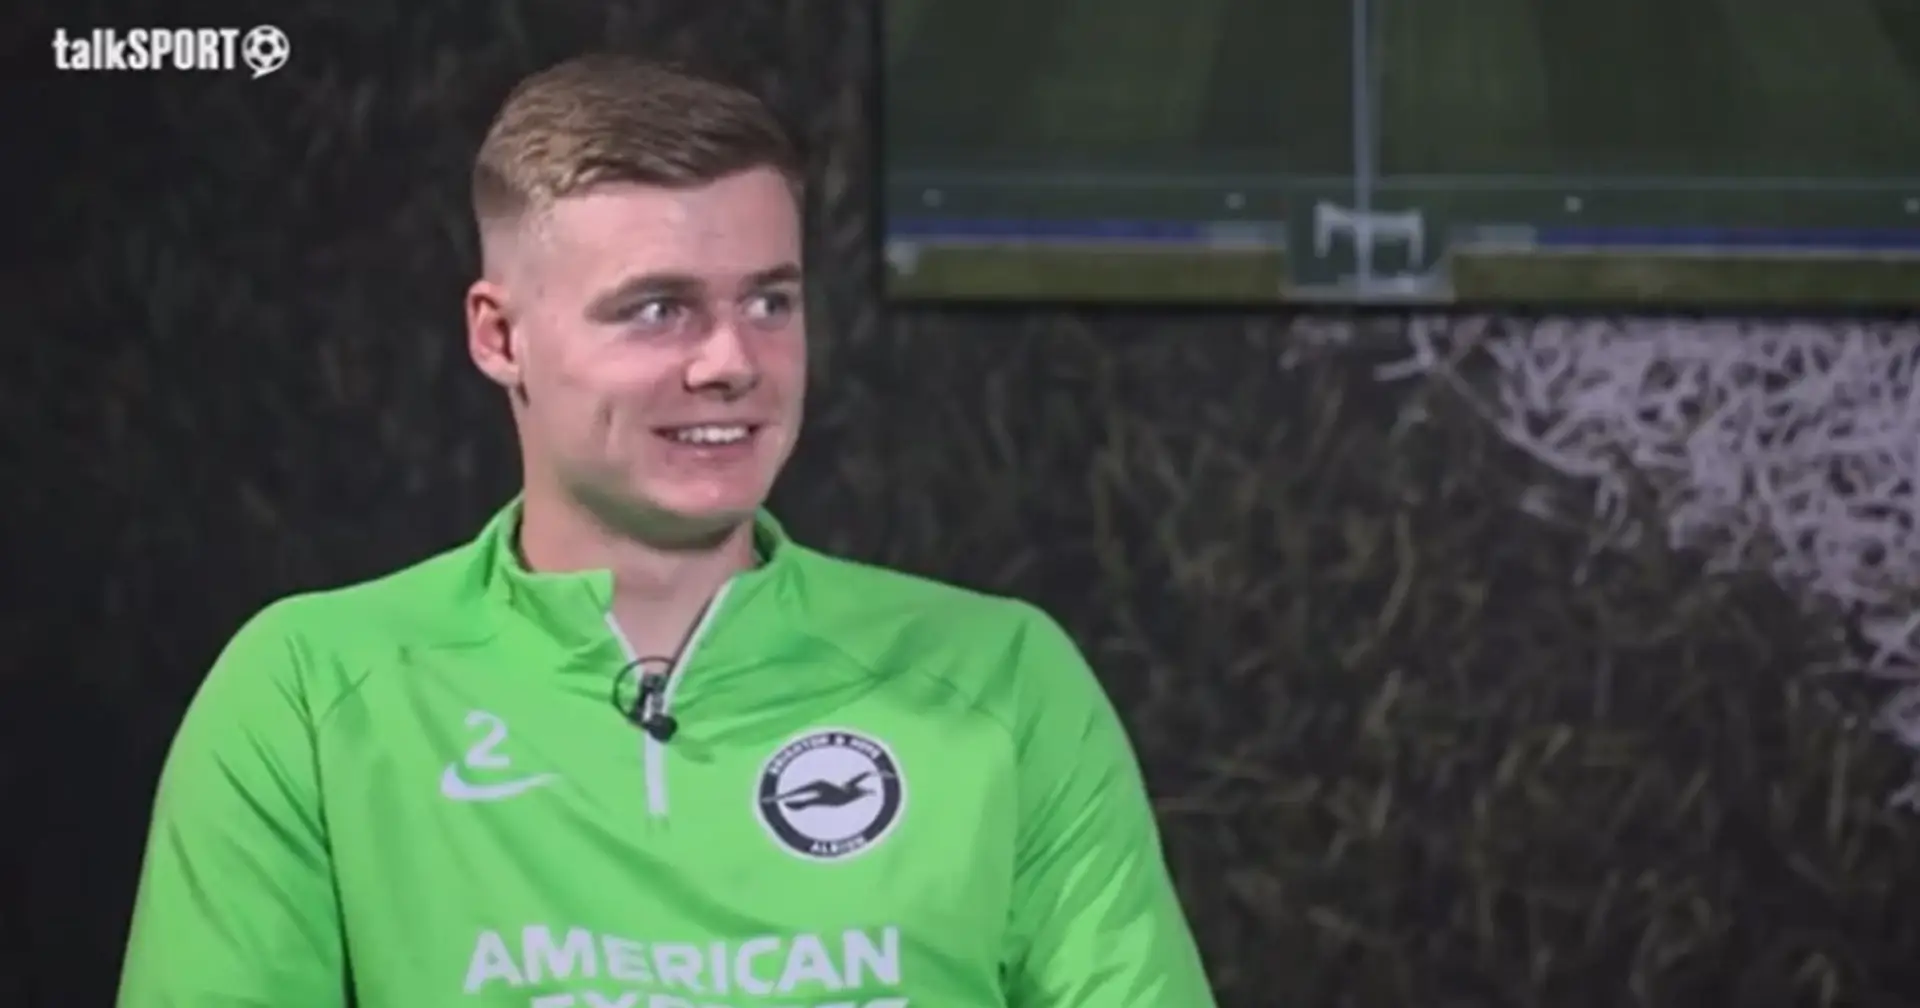 'Because I'm Irish': Evan Ferguson looks bemused when asked why he won't ditch Ireland for England